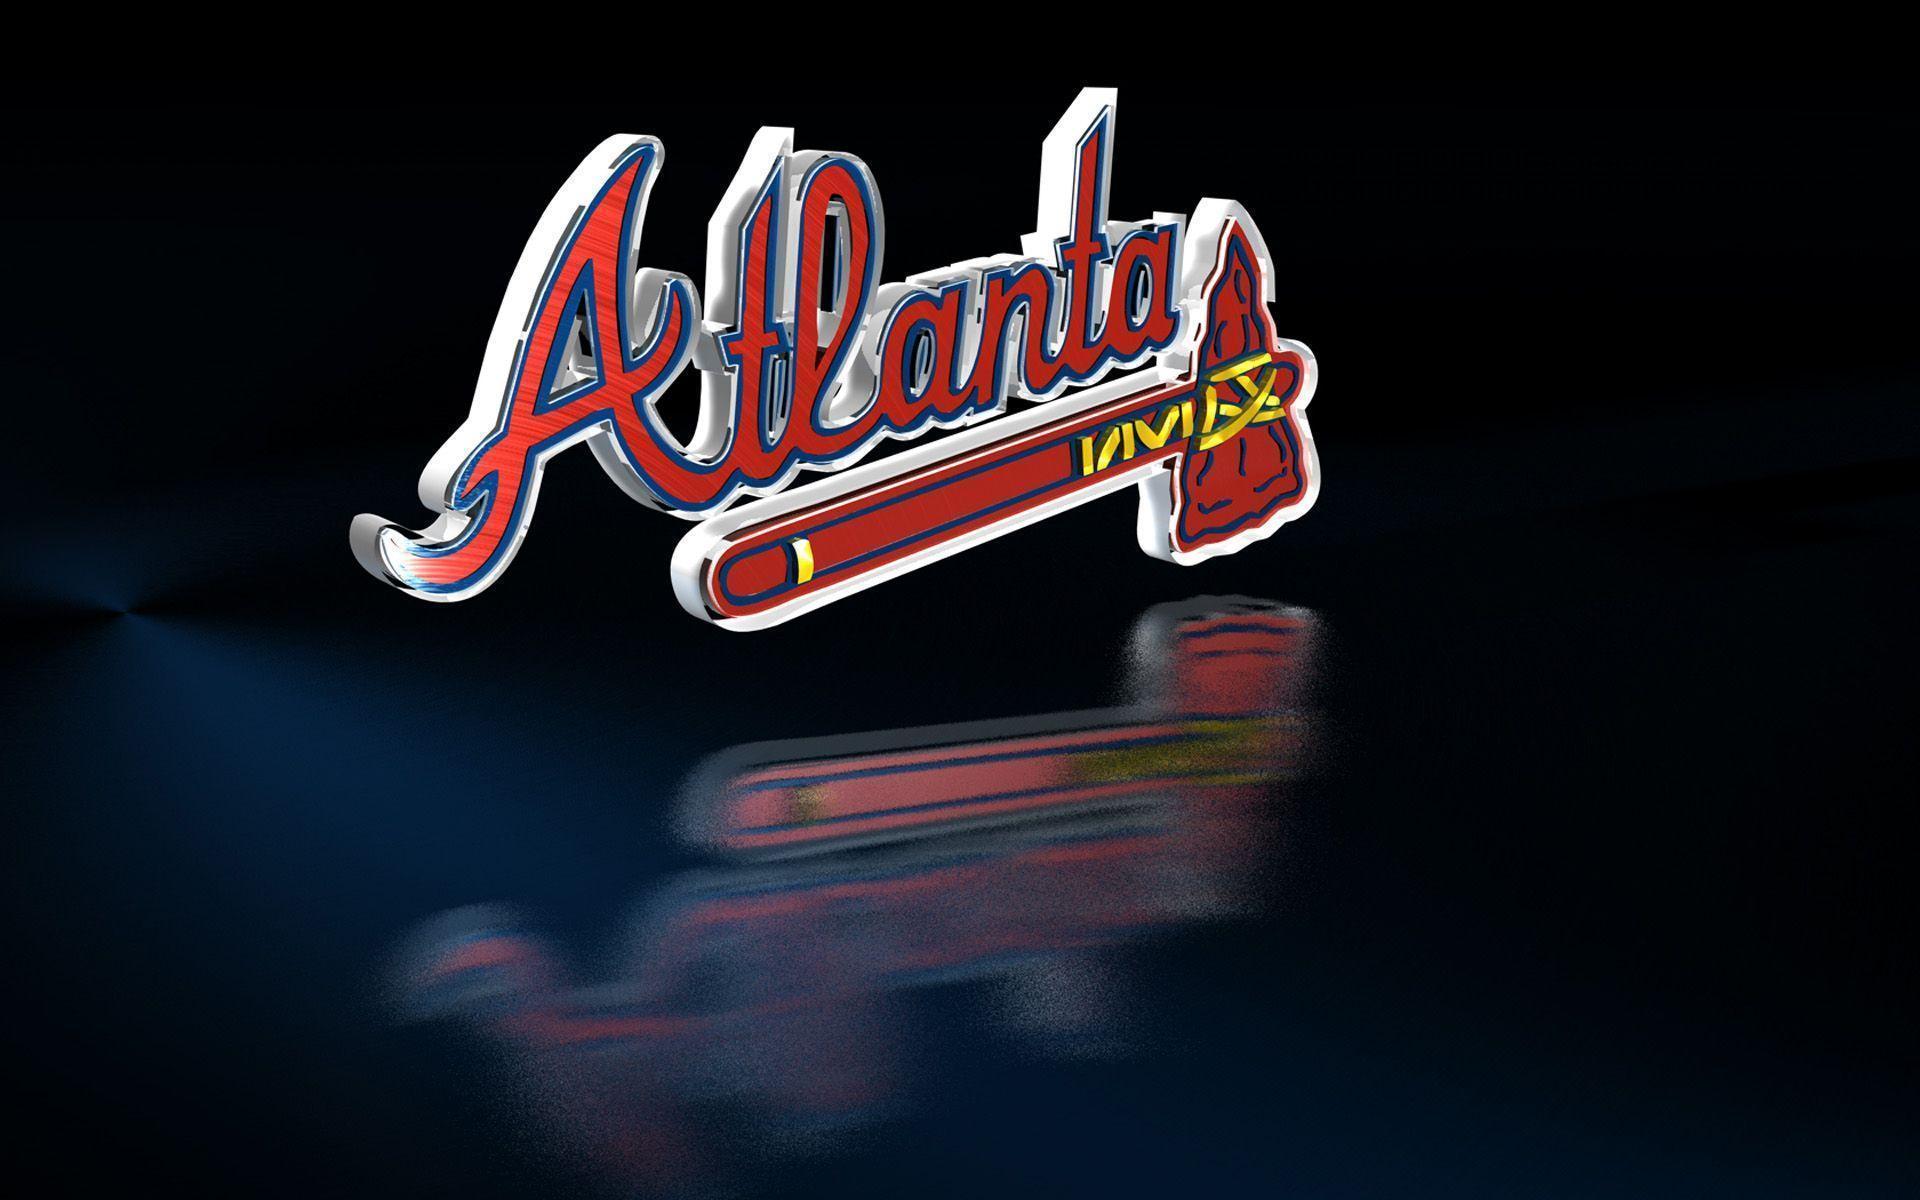 Atlanta Braves Wallpapers HD  HD Wallpapers Backgrounds Images    ClipArt Best  ClipArt Best